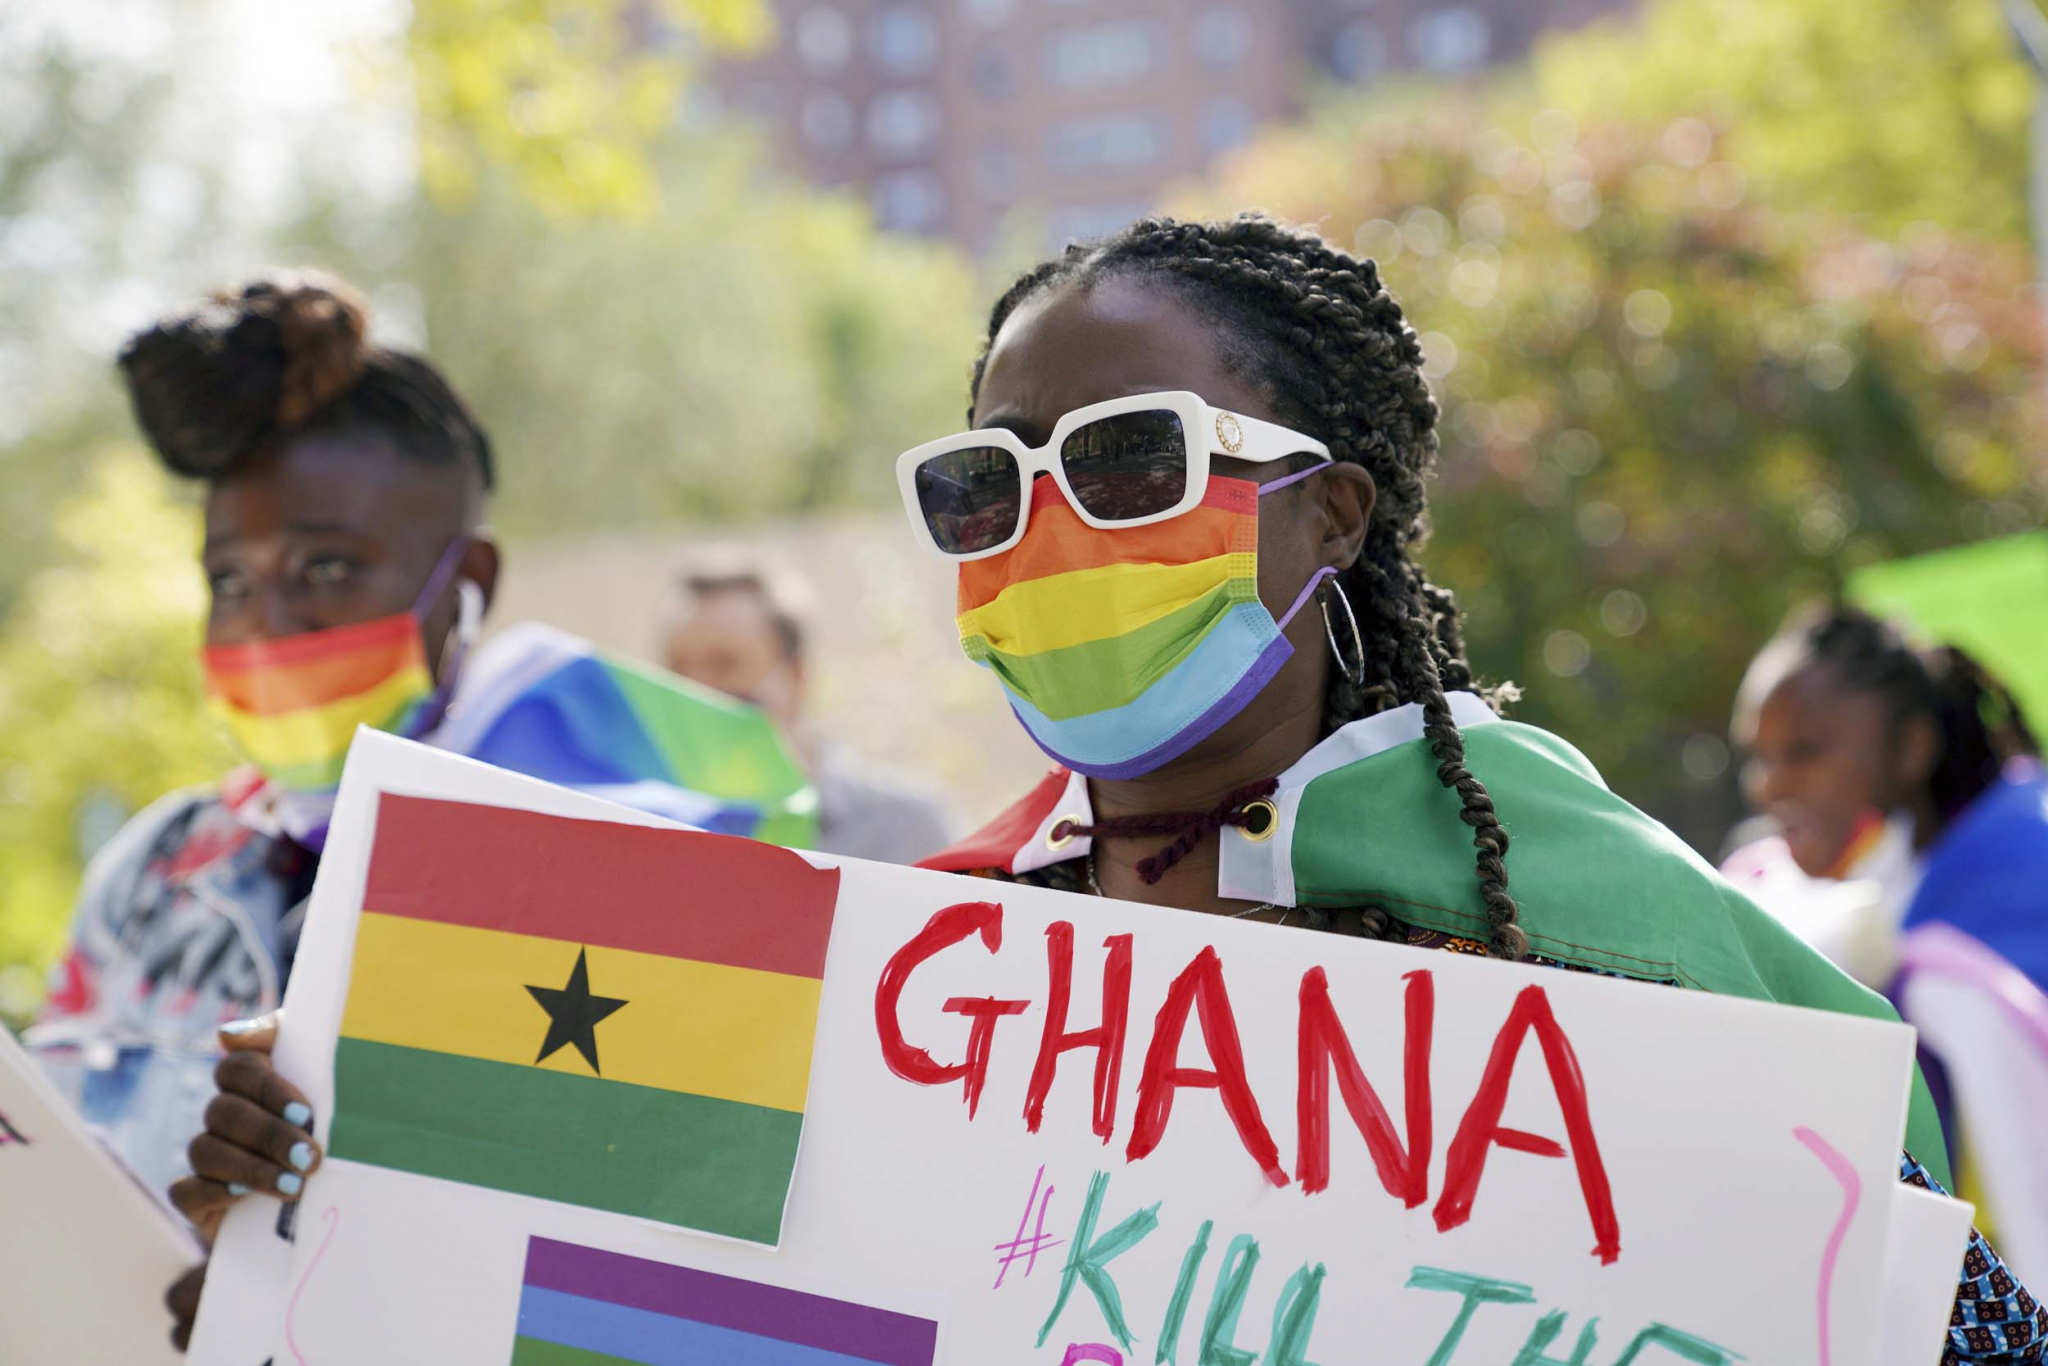 If the new Bill is passed in Ghana, people found to be advocating LGBTQIA+ rights could face prison sentences of up to 10 years ©Getty Images